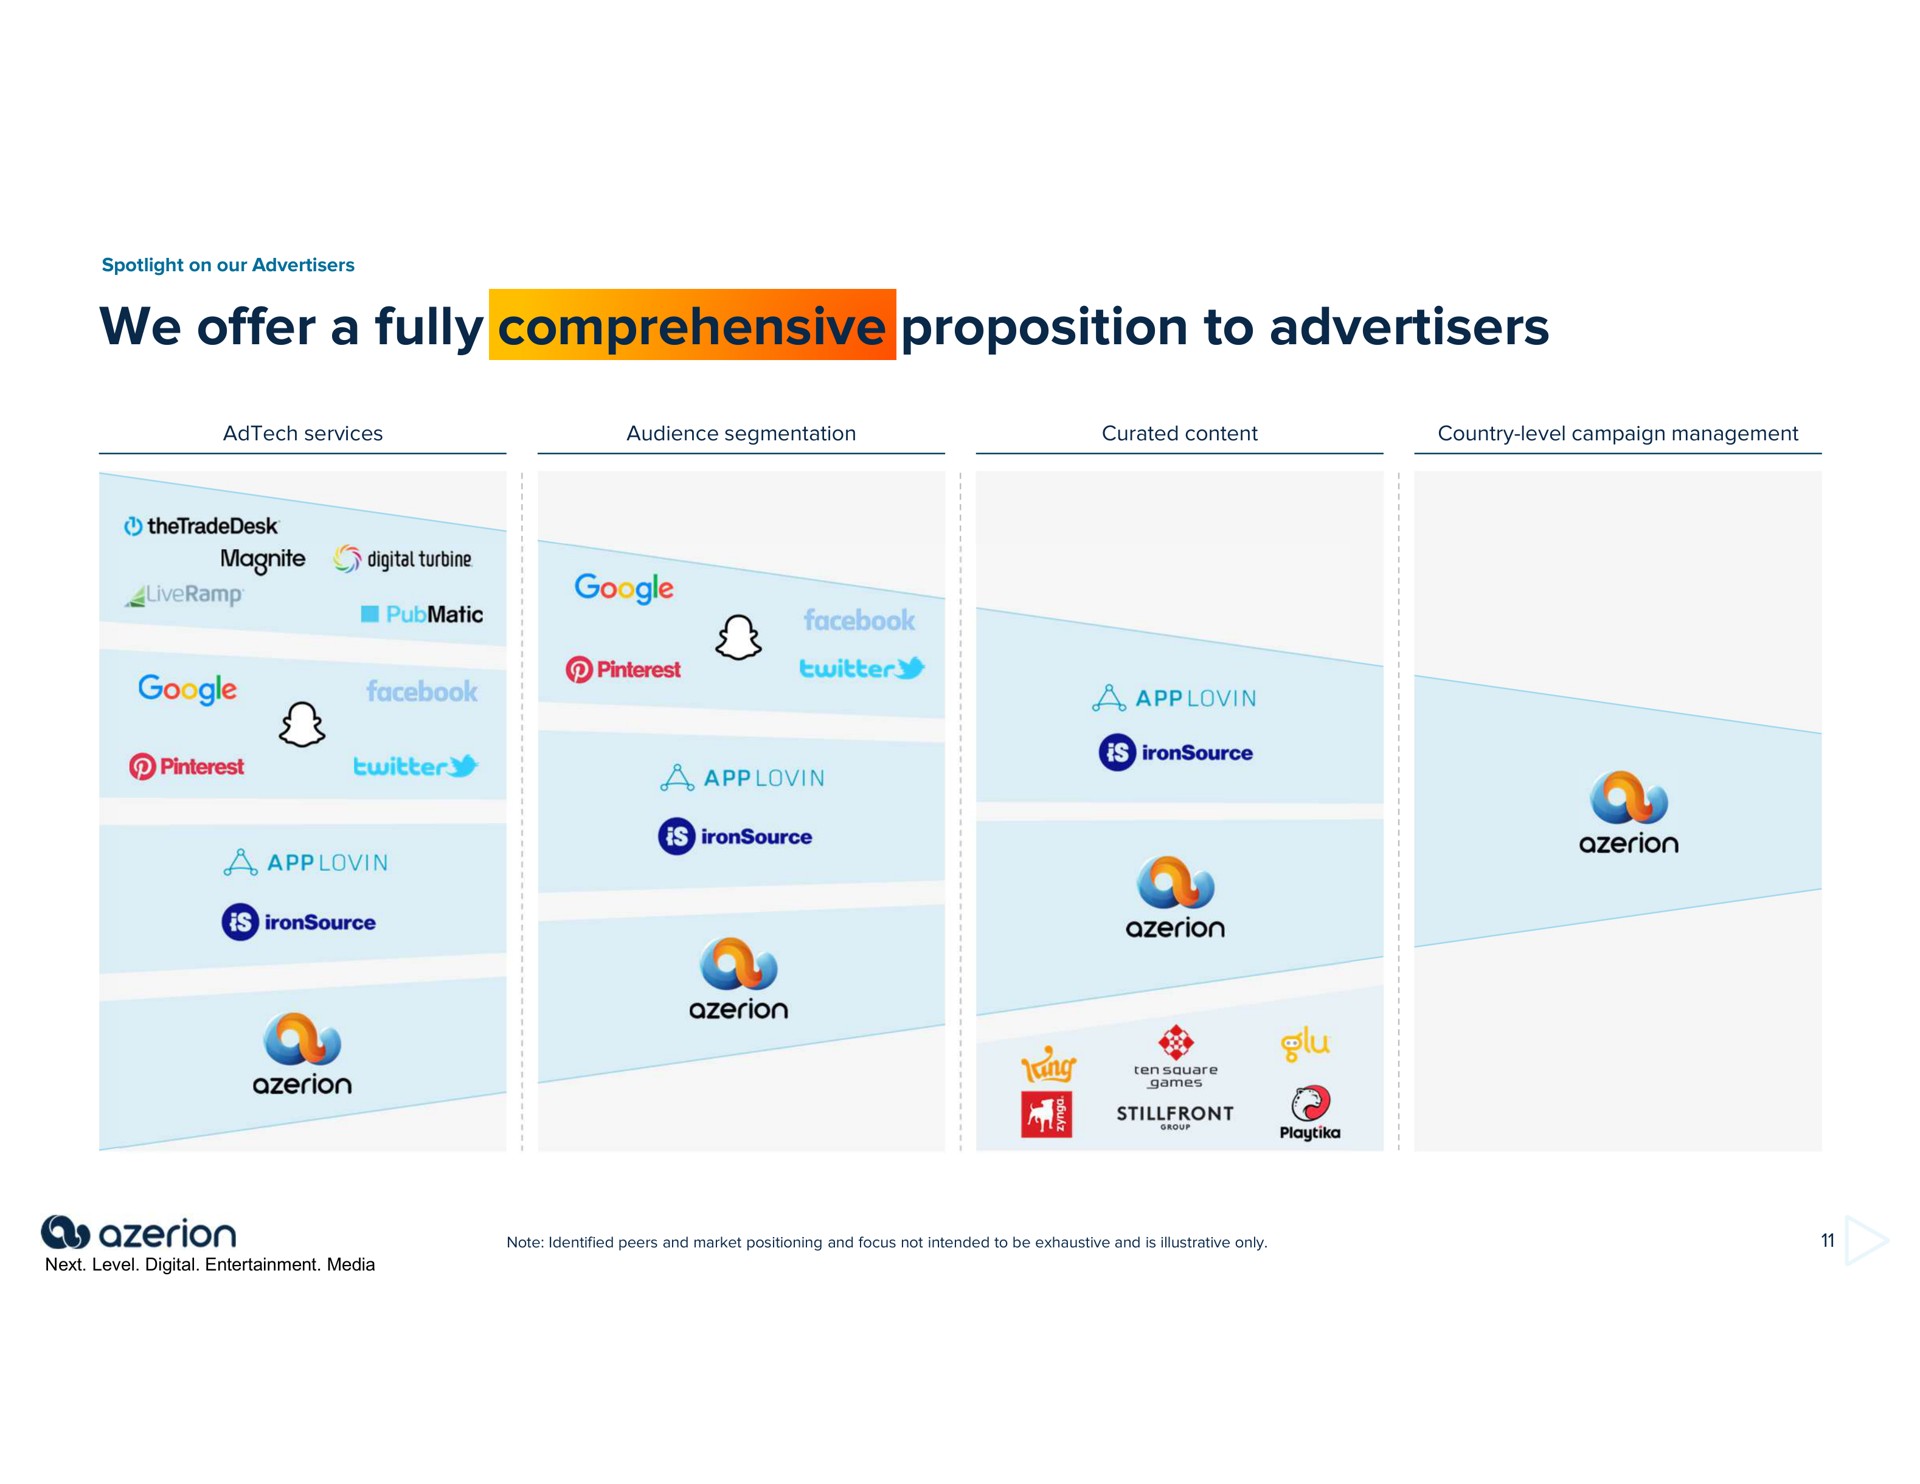 we offer a fully comprehensive proposition to advertisers | Azerion